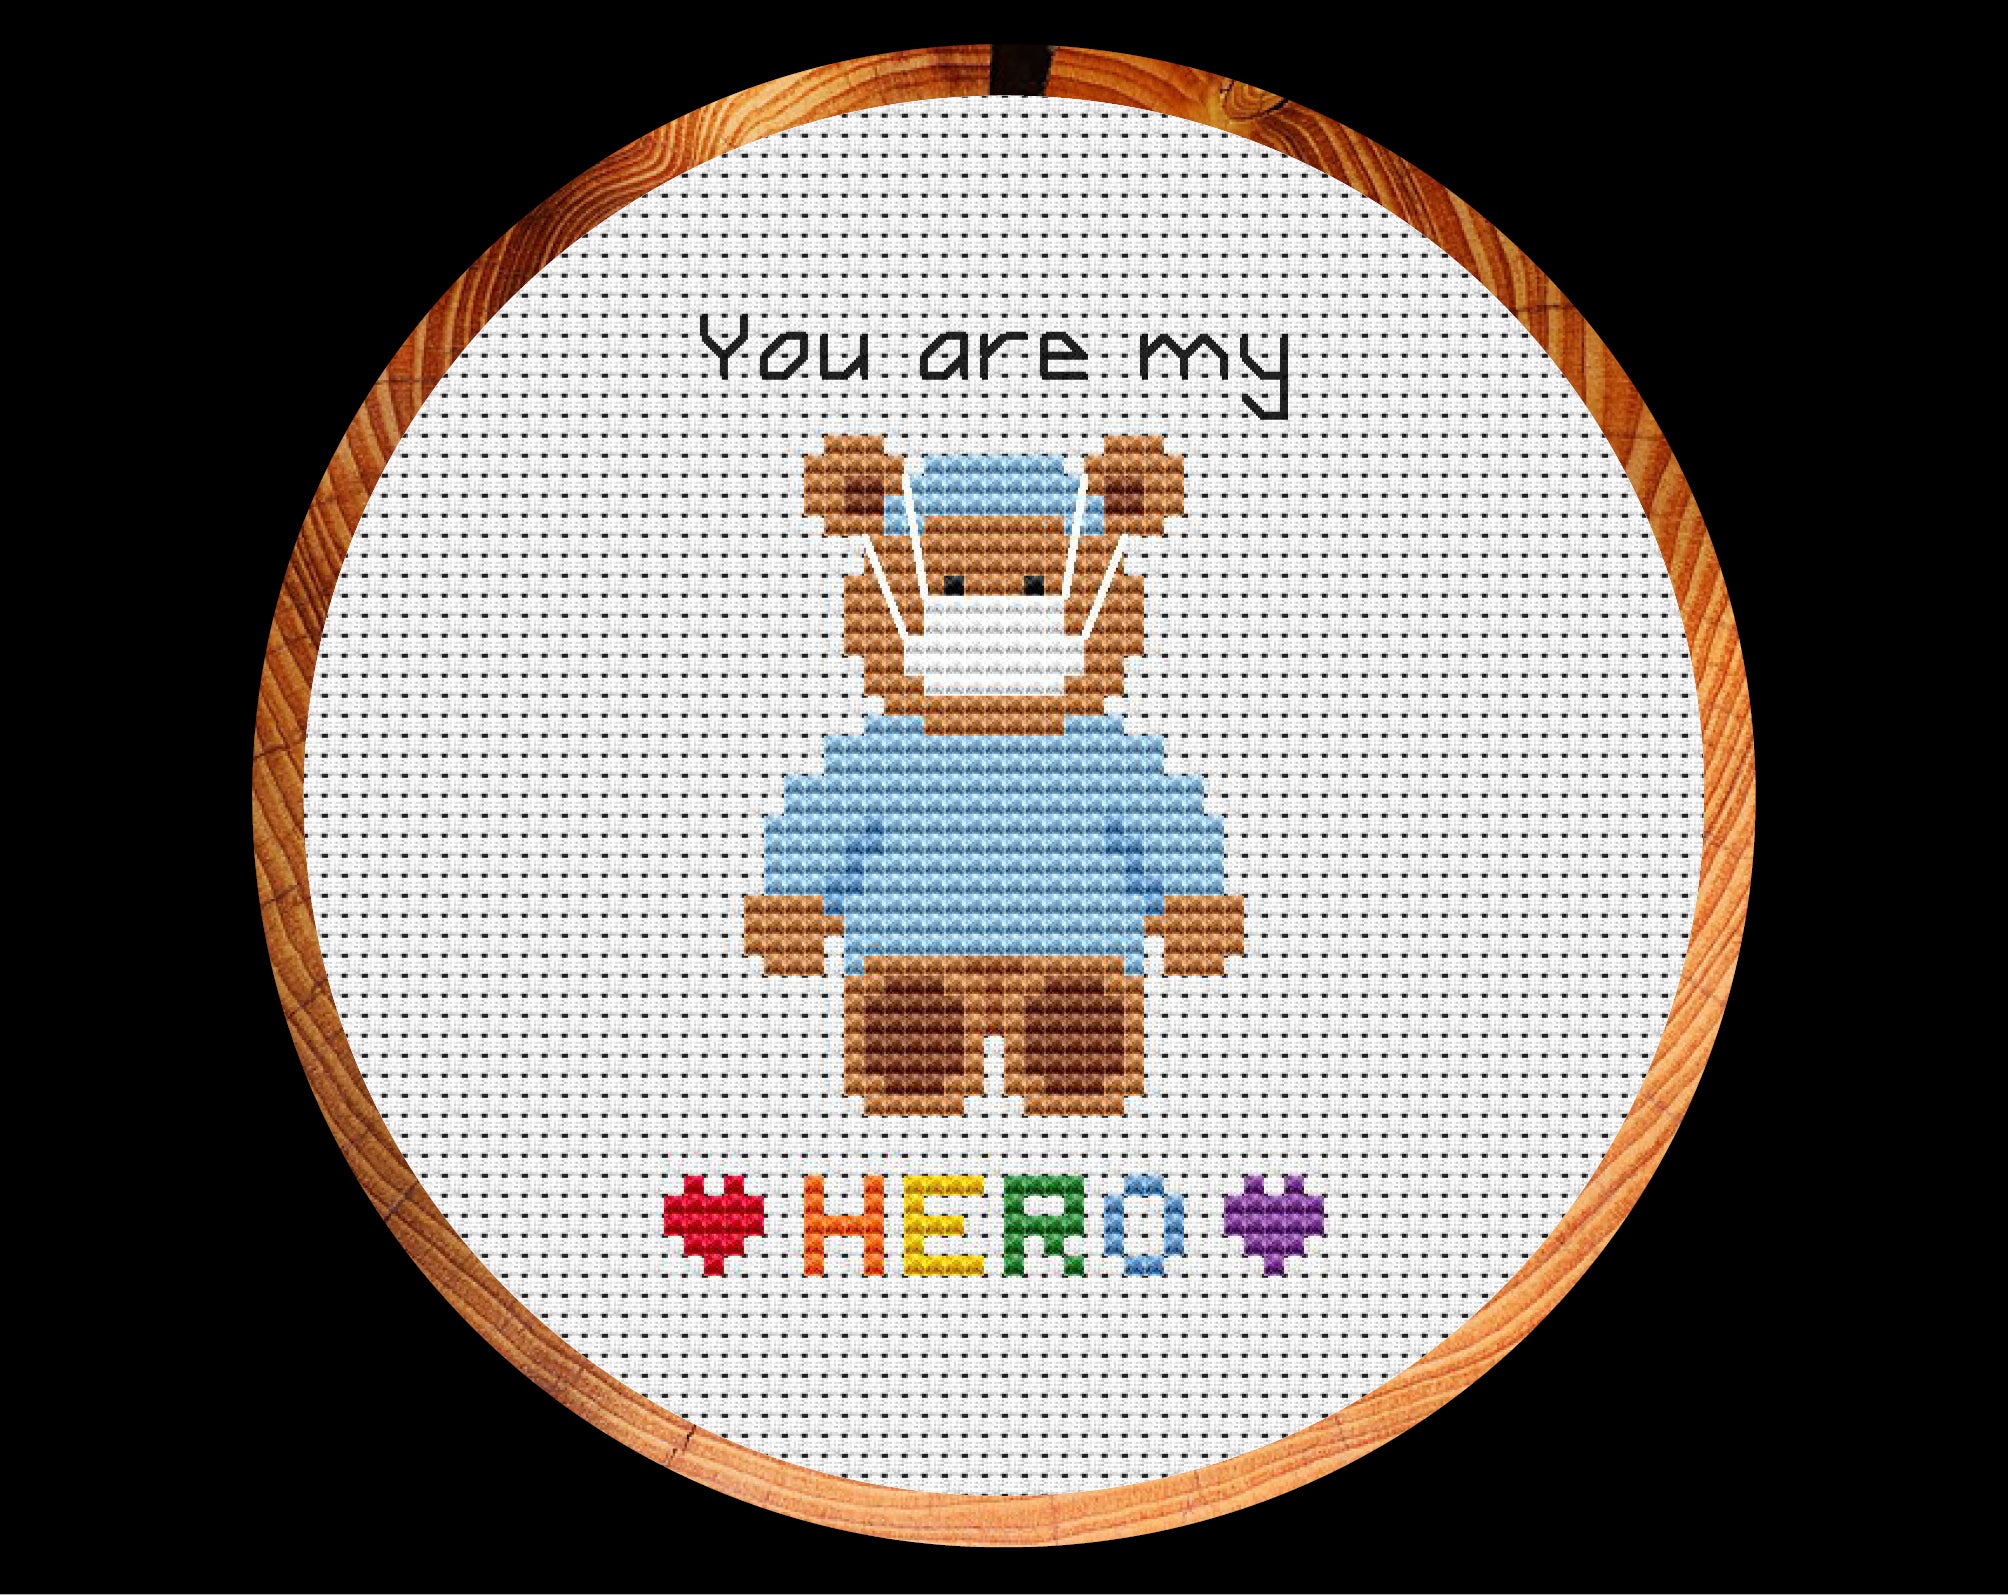 Cross stitch pattern of teddy bear wearing scrubs and a face mask, with the words 'You are my HERO'. Shown in hoop.